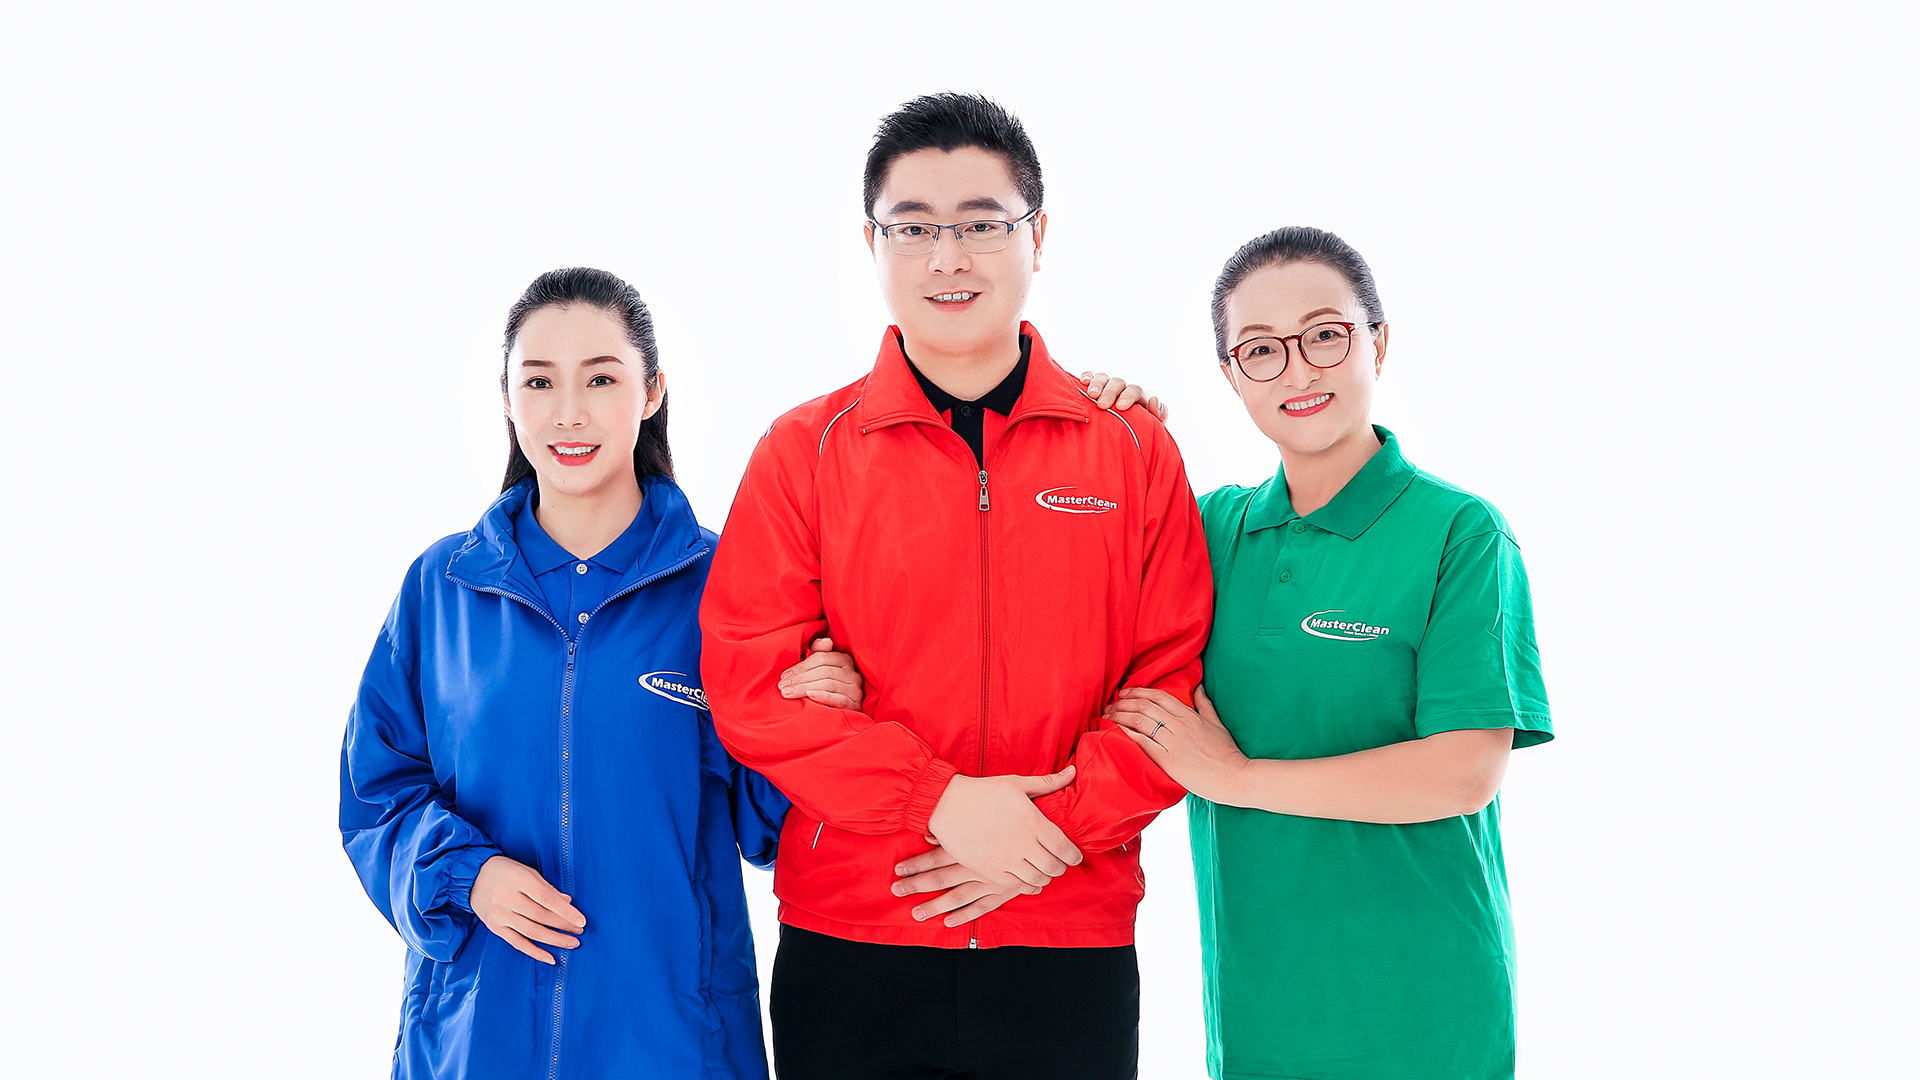 It is a Brand and Service Shooting for Hong Kong Cleaning company by D2 Studio Branding Agency Brand Identity and Design Hong Kong and Guangzhou China who does Brand and Service Shooting. 7